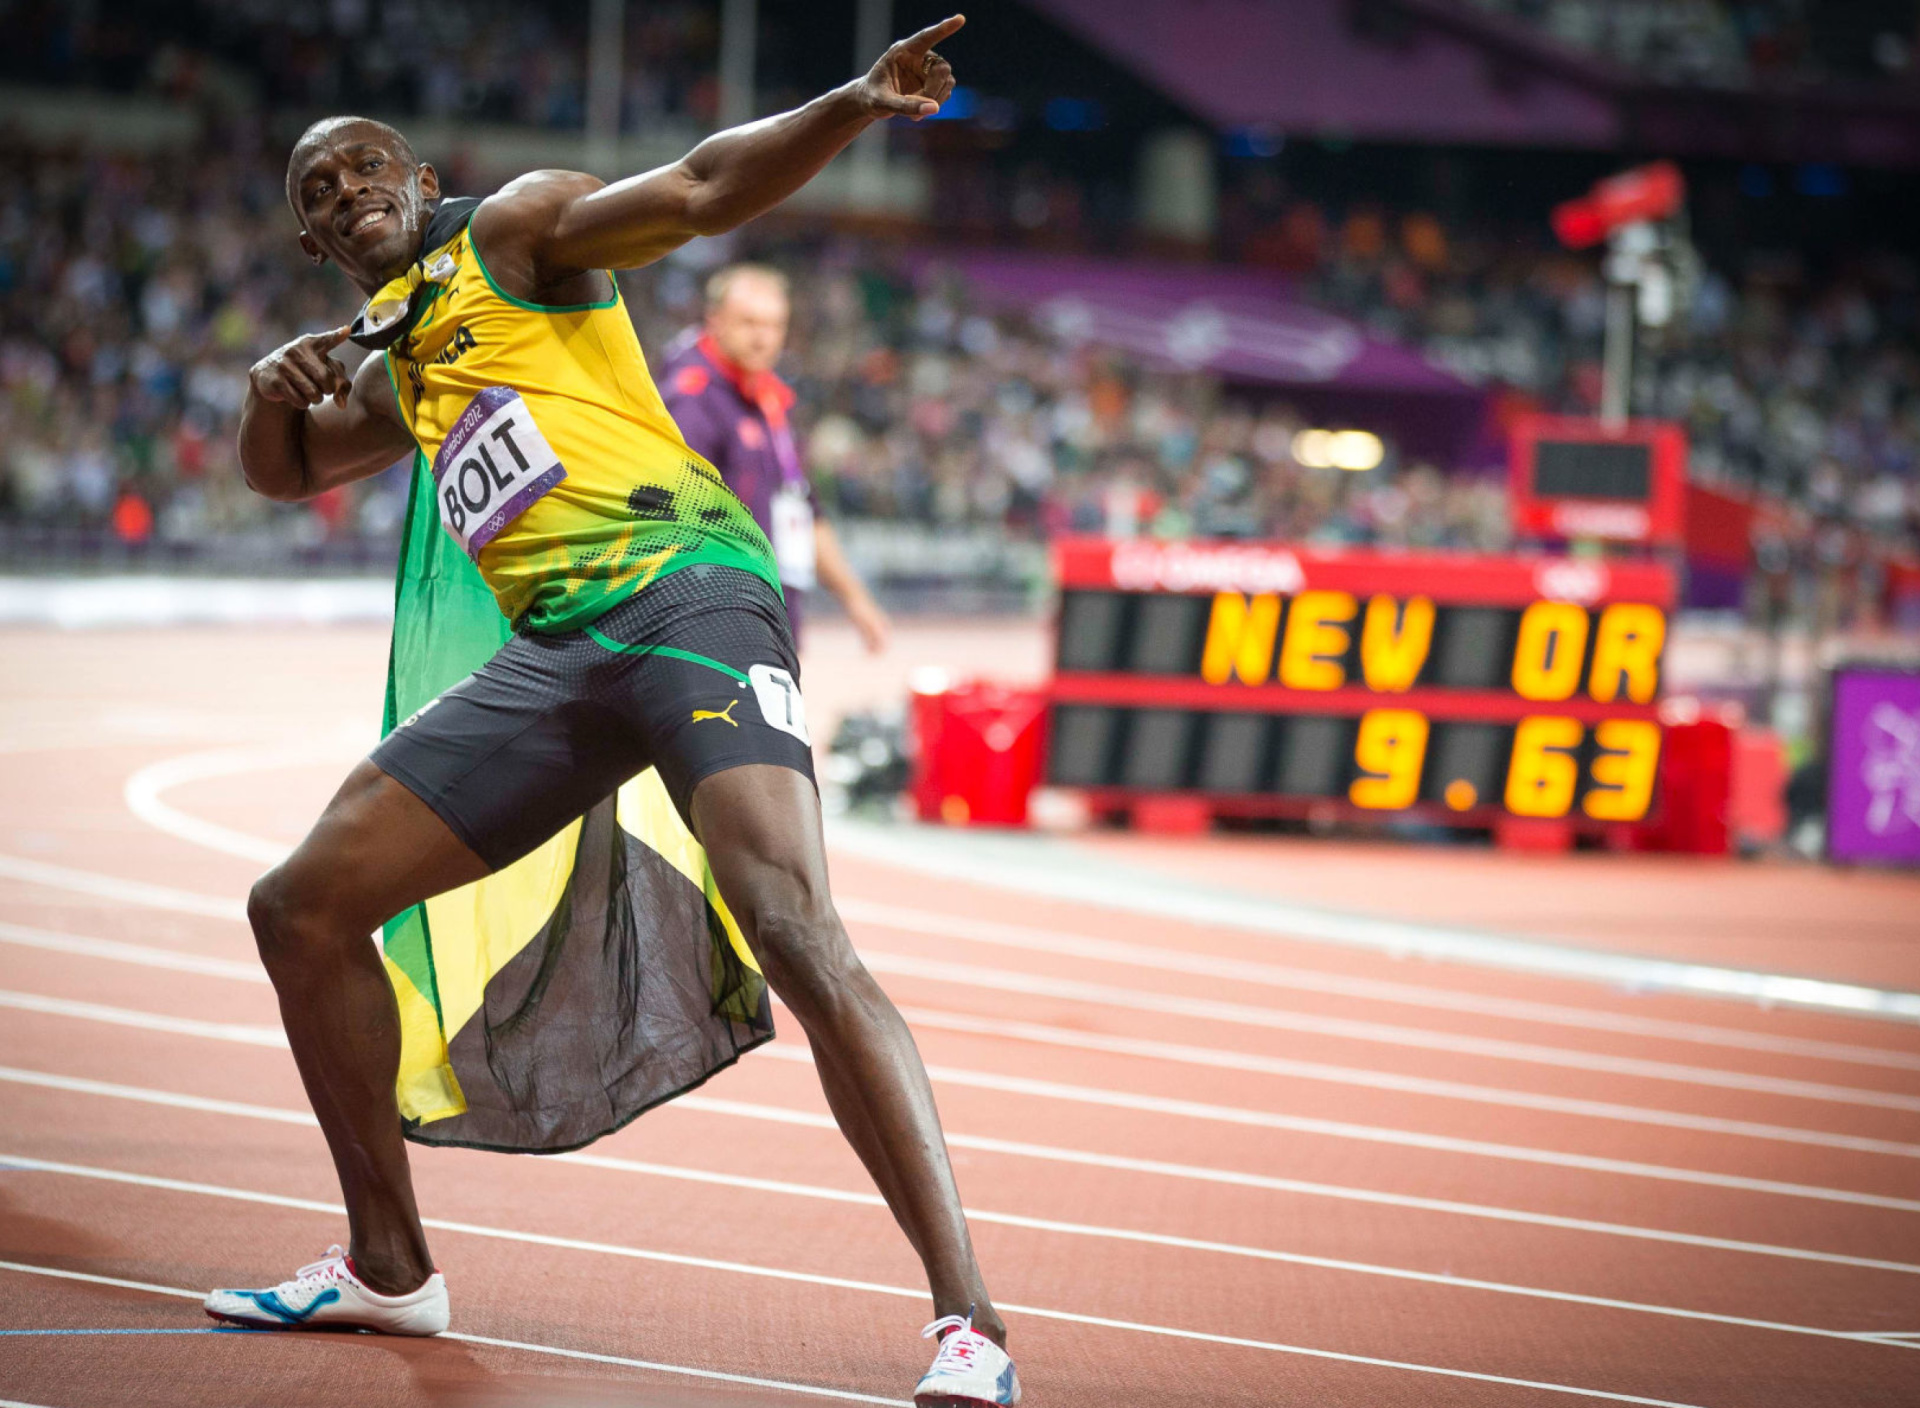 Usain Bolt won medals in the Olympics screenshot #1 1920x1408